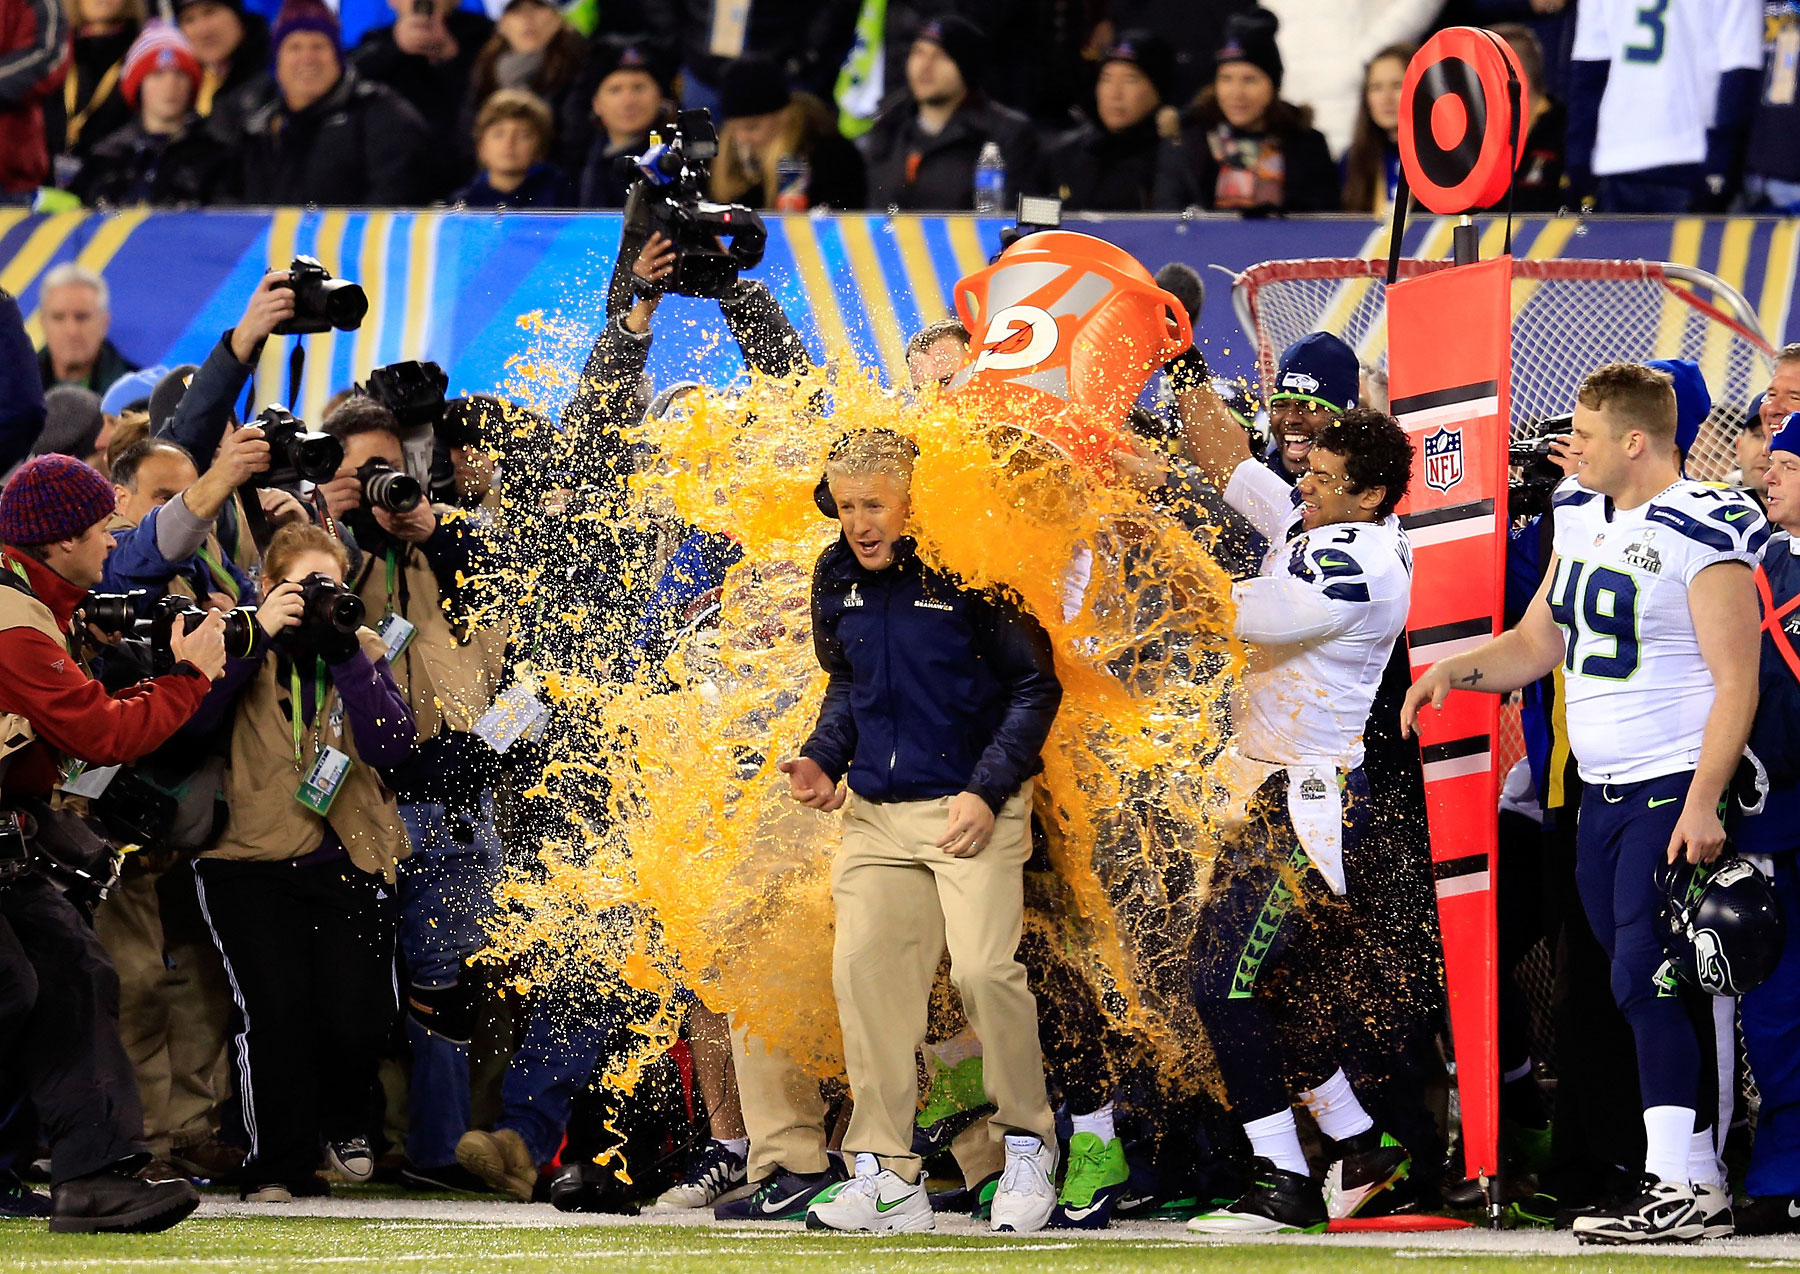 Tight end Zach Miller and quarterback Russell Wilson of the Seattle Seahawks dump Gatorade on head coach Pete Carroll in the fourth quarter of Super Bowl XLVIII.